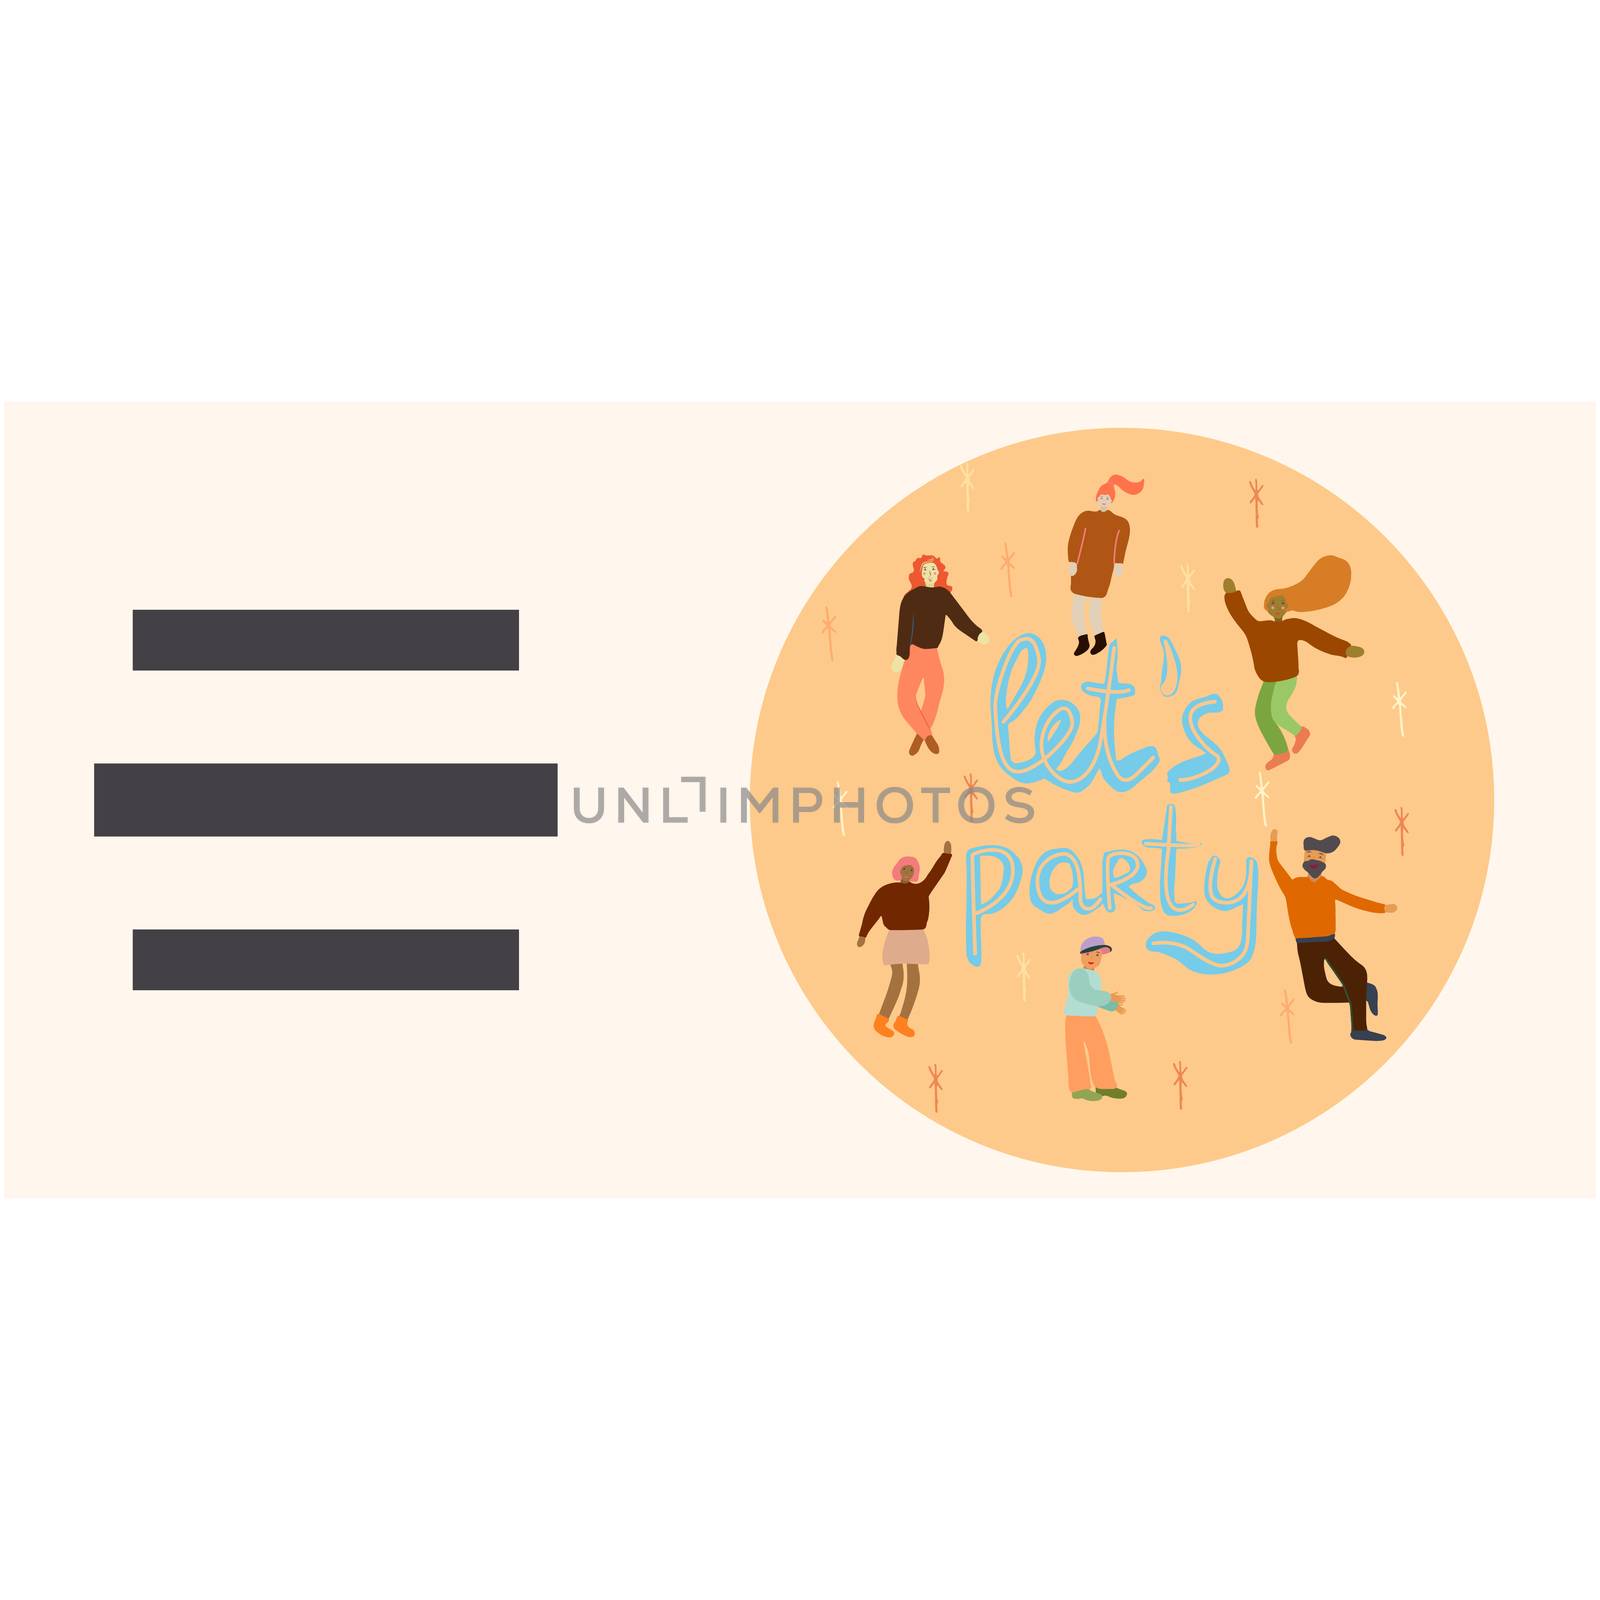 Circle with dancing people and let s party hand lettering. Space for your text. For postcards, posters, banners. Vector illustration made by hand.